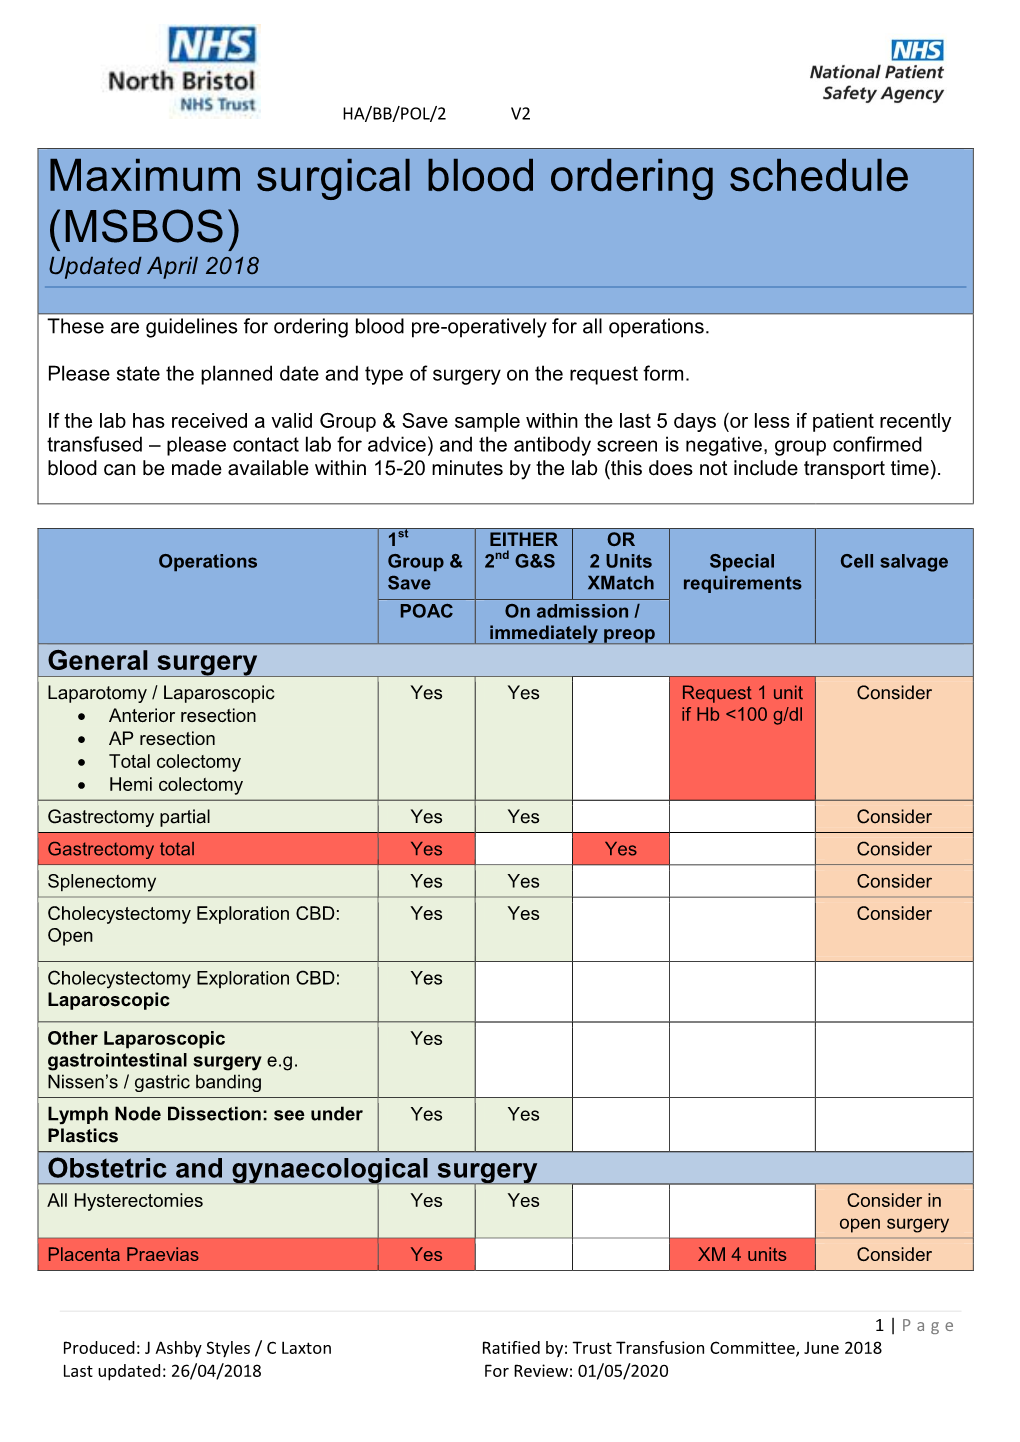 Maximum Surgical Blood Ordering Schedule (MSBOS) Updated April 2018